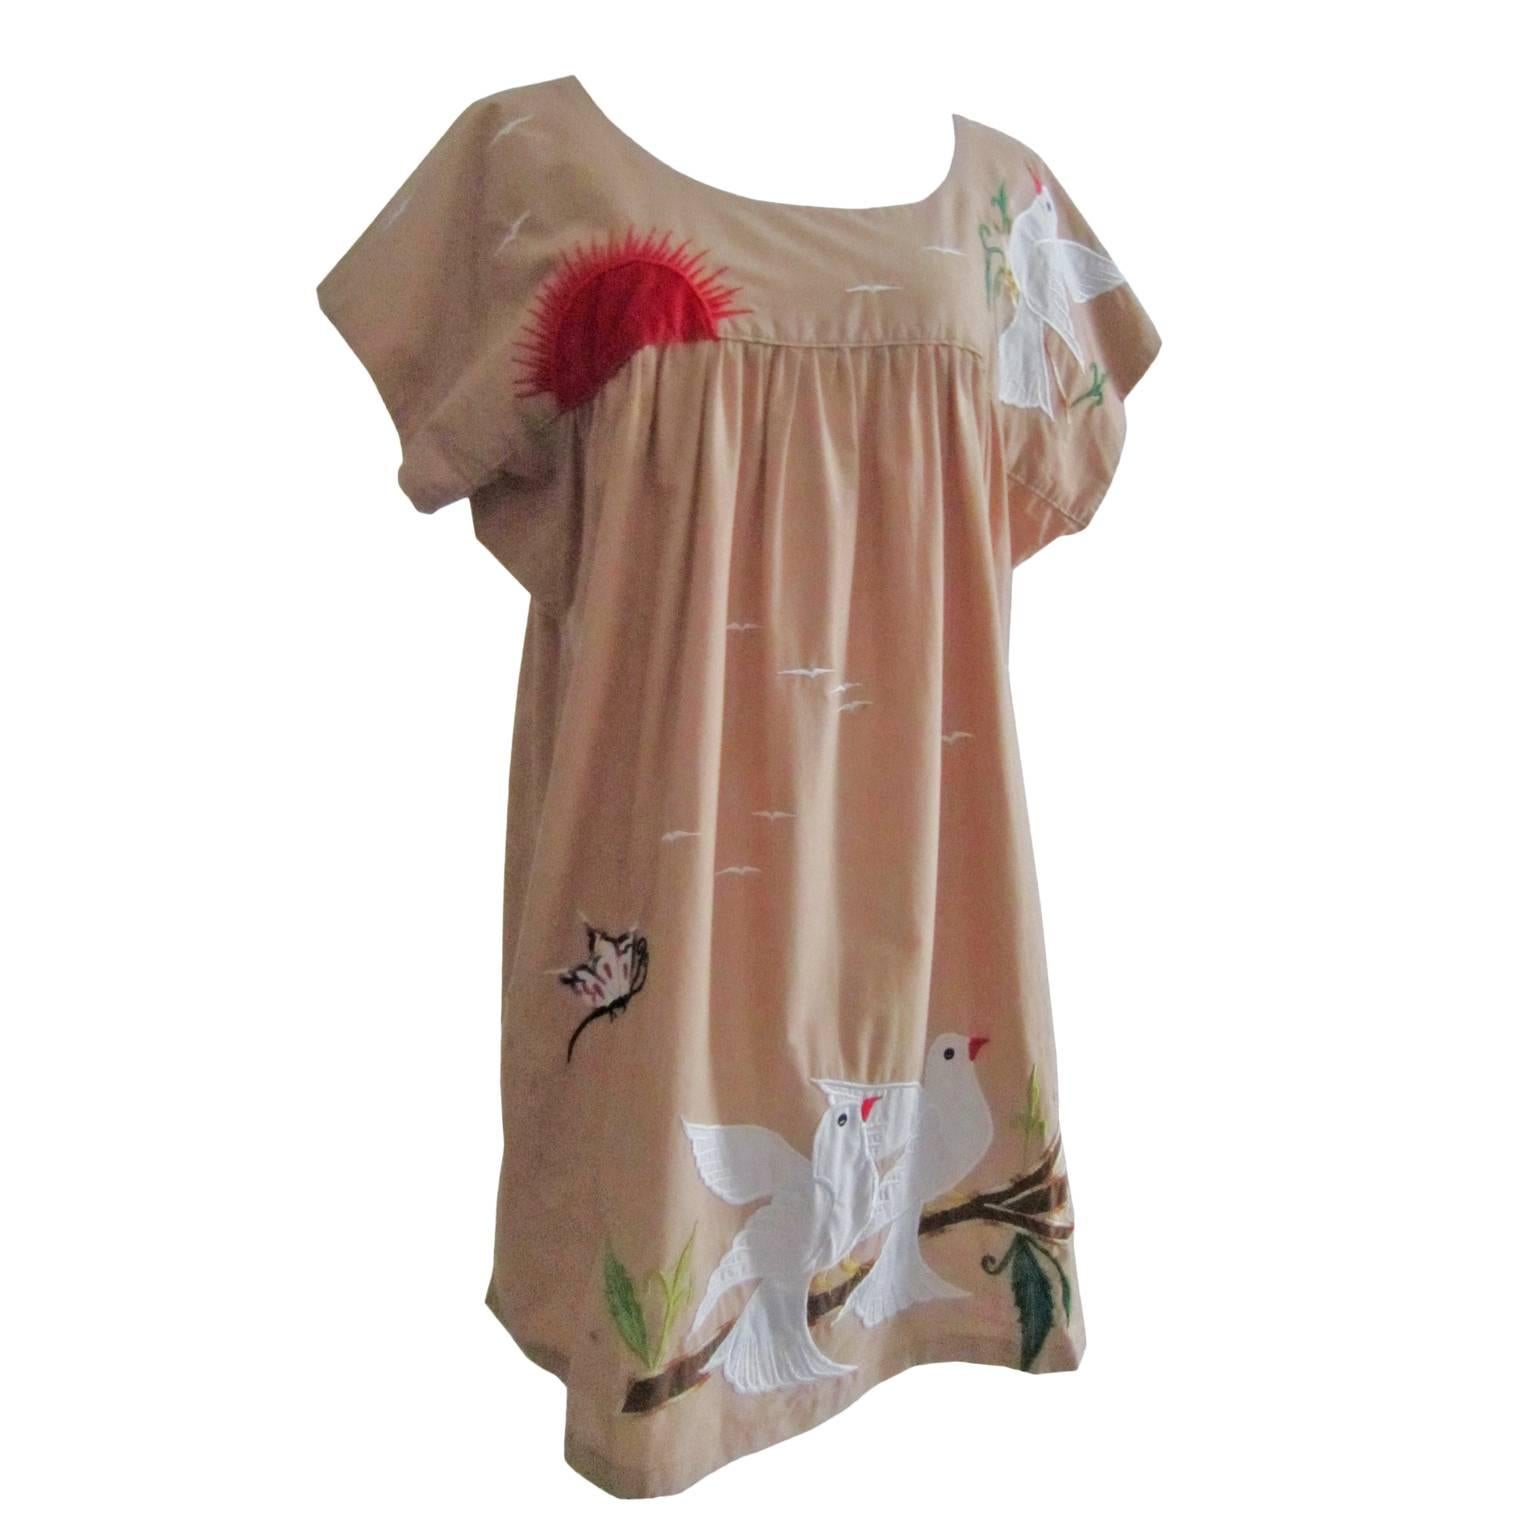 Vintage Oaxacan embroidered dress from circa 1970s.
A-Line silhouette taupe pink / beige cotton base with bright white birds appliques and embroidered butterfly, flower motifs. A lovely happy dress.
 
Measurements : 
Shoulders : circa 38 cm
Underarm